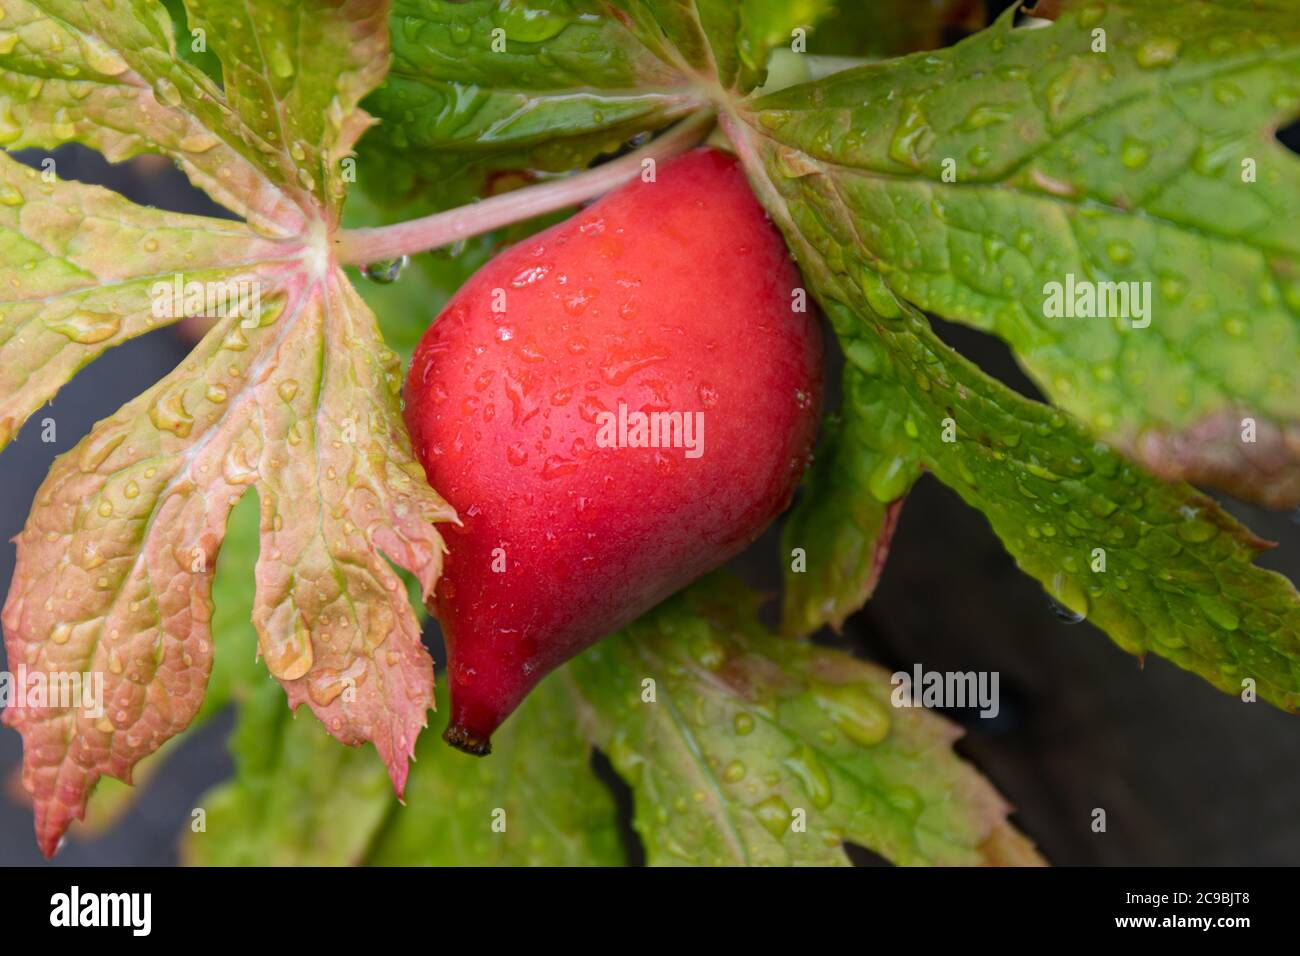 Ripe red-orange fruit of Podophyllum hexandrum or Sinopodophyllum hexandrum also known as Himalayan may apple or Indian may apple Stock Photo